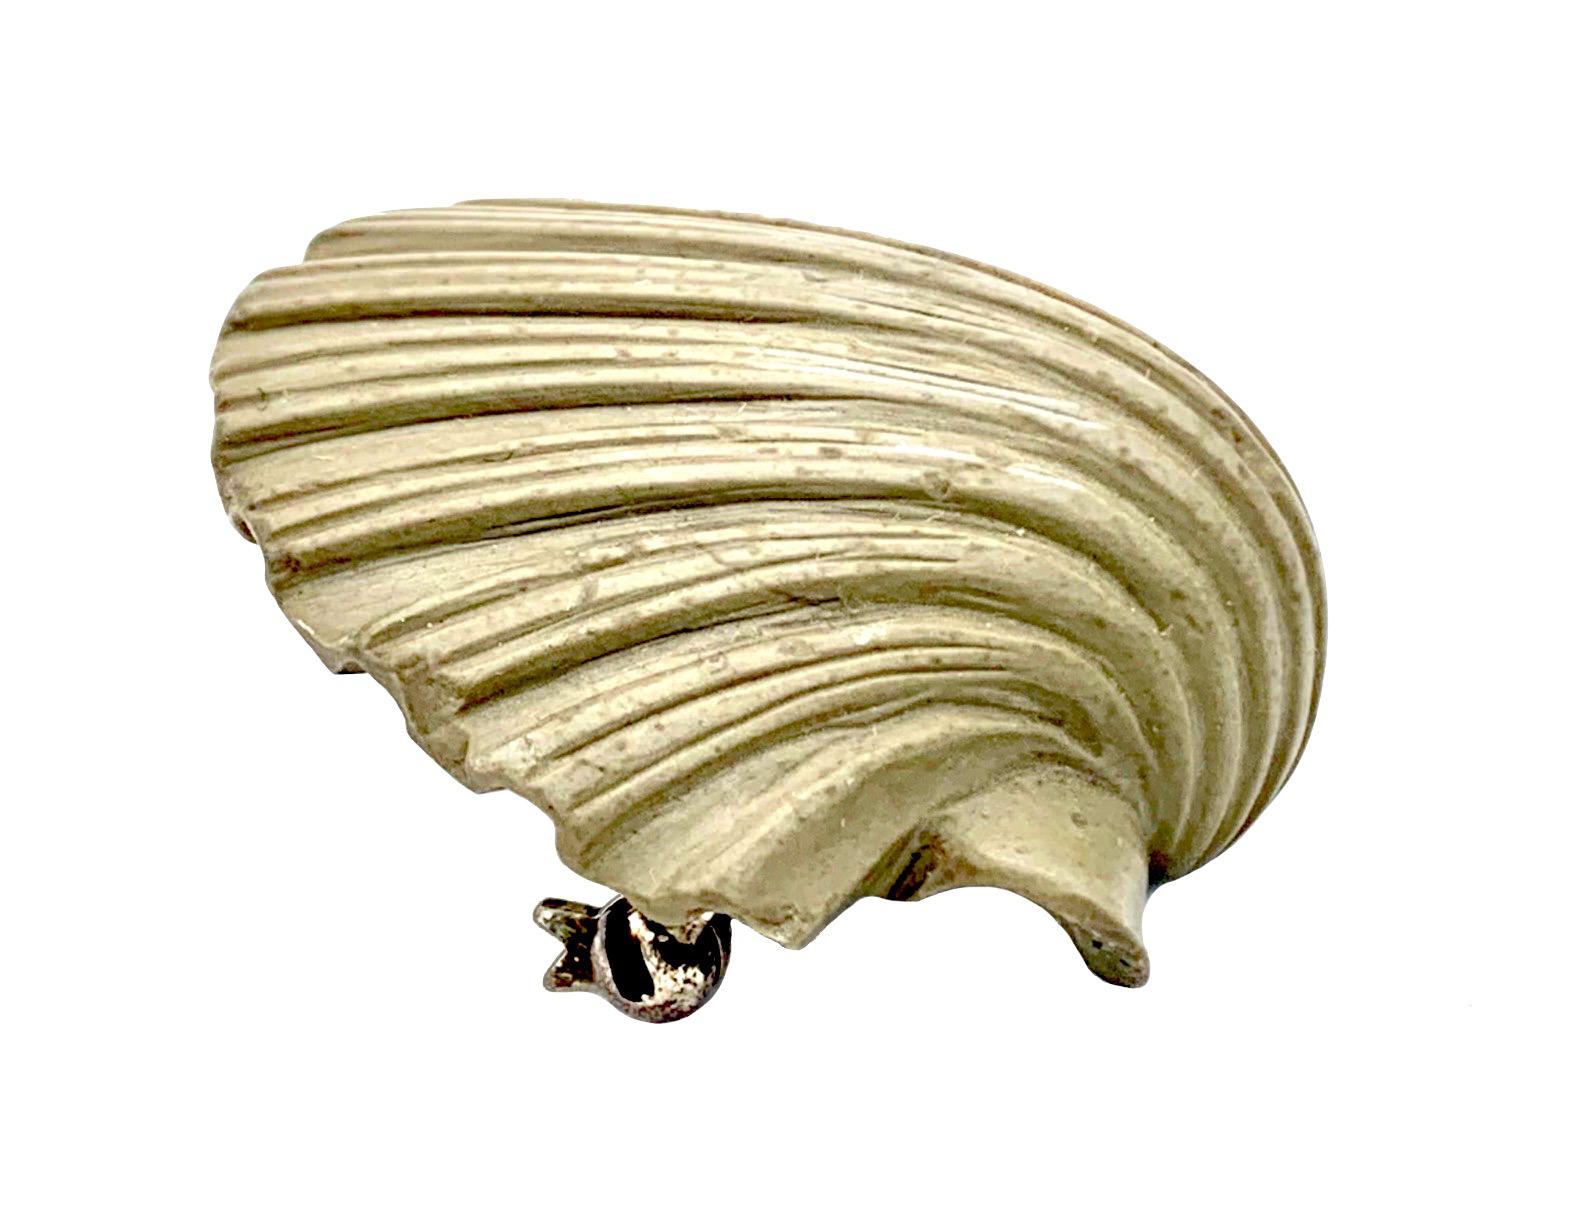 This lovely junky scallop shell has been hand carved out of lava in the first half of the nineteenth century. Scallops were the symbol of pilgrims that walked the camino de Santiago or the way of St, James,, they often had a scallop stitched onto